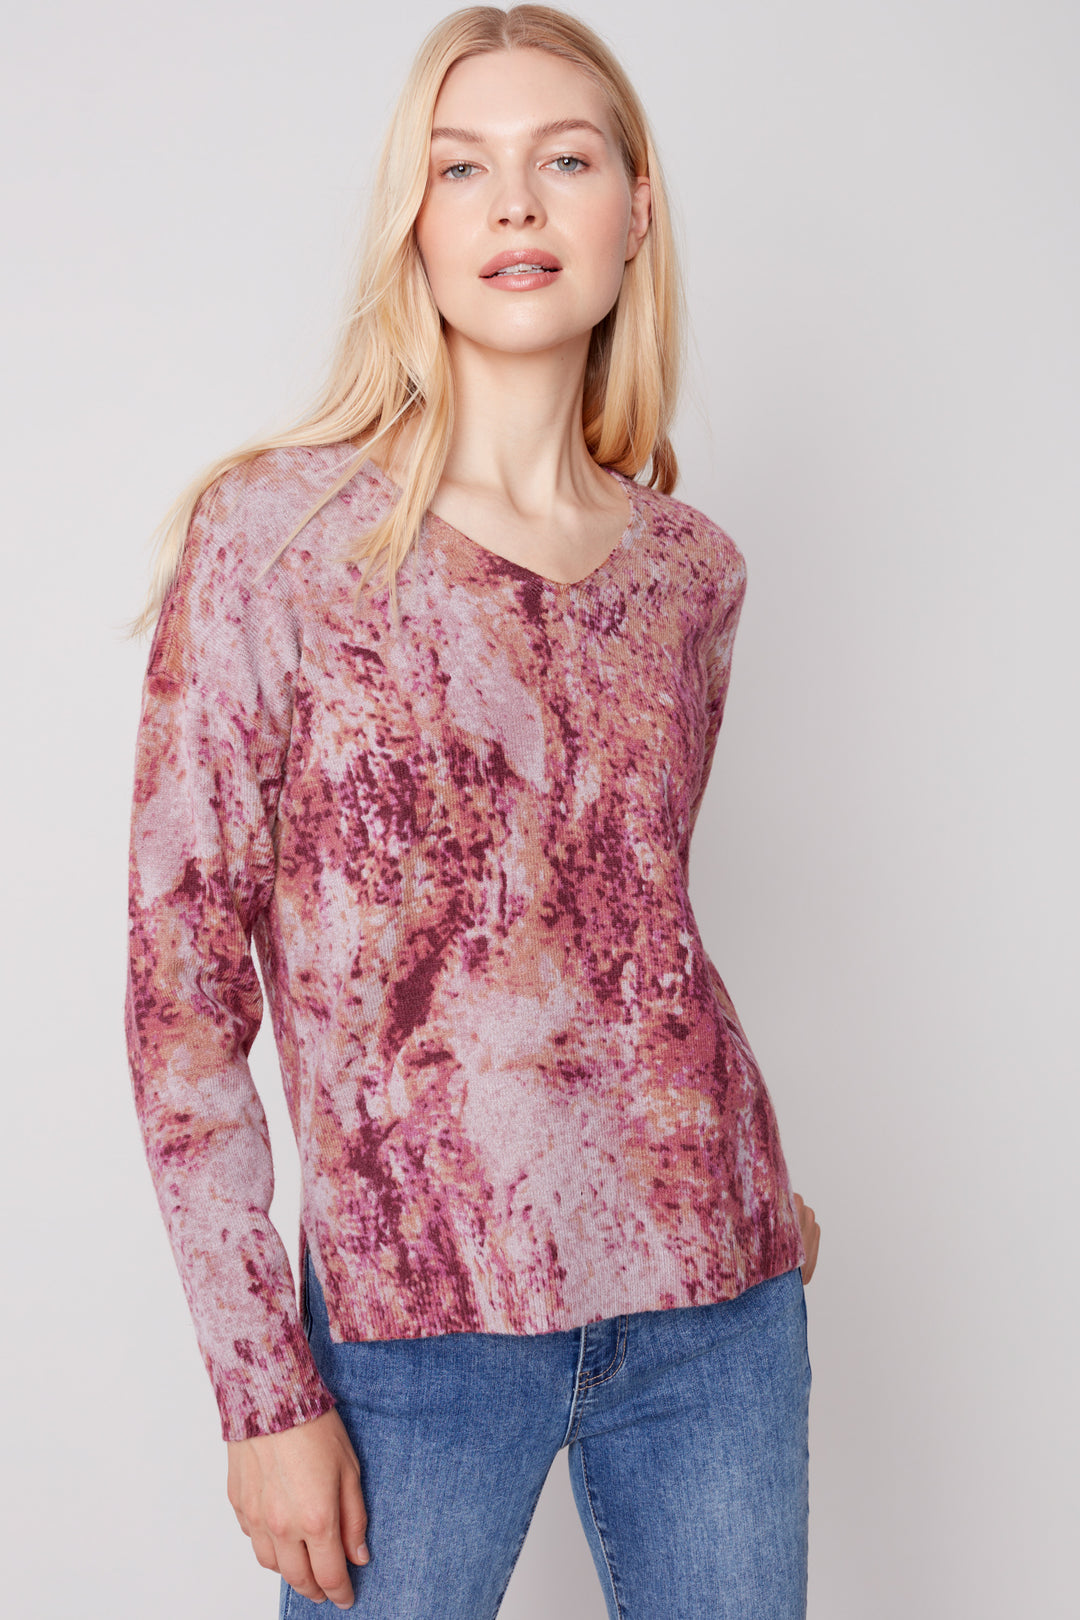 This beautiful printed plush knit v-neck sweater features a stunning speckle print design and plushy drop shoulder details.